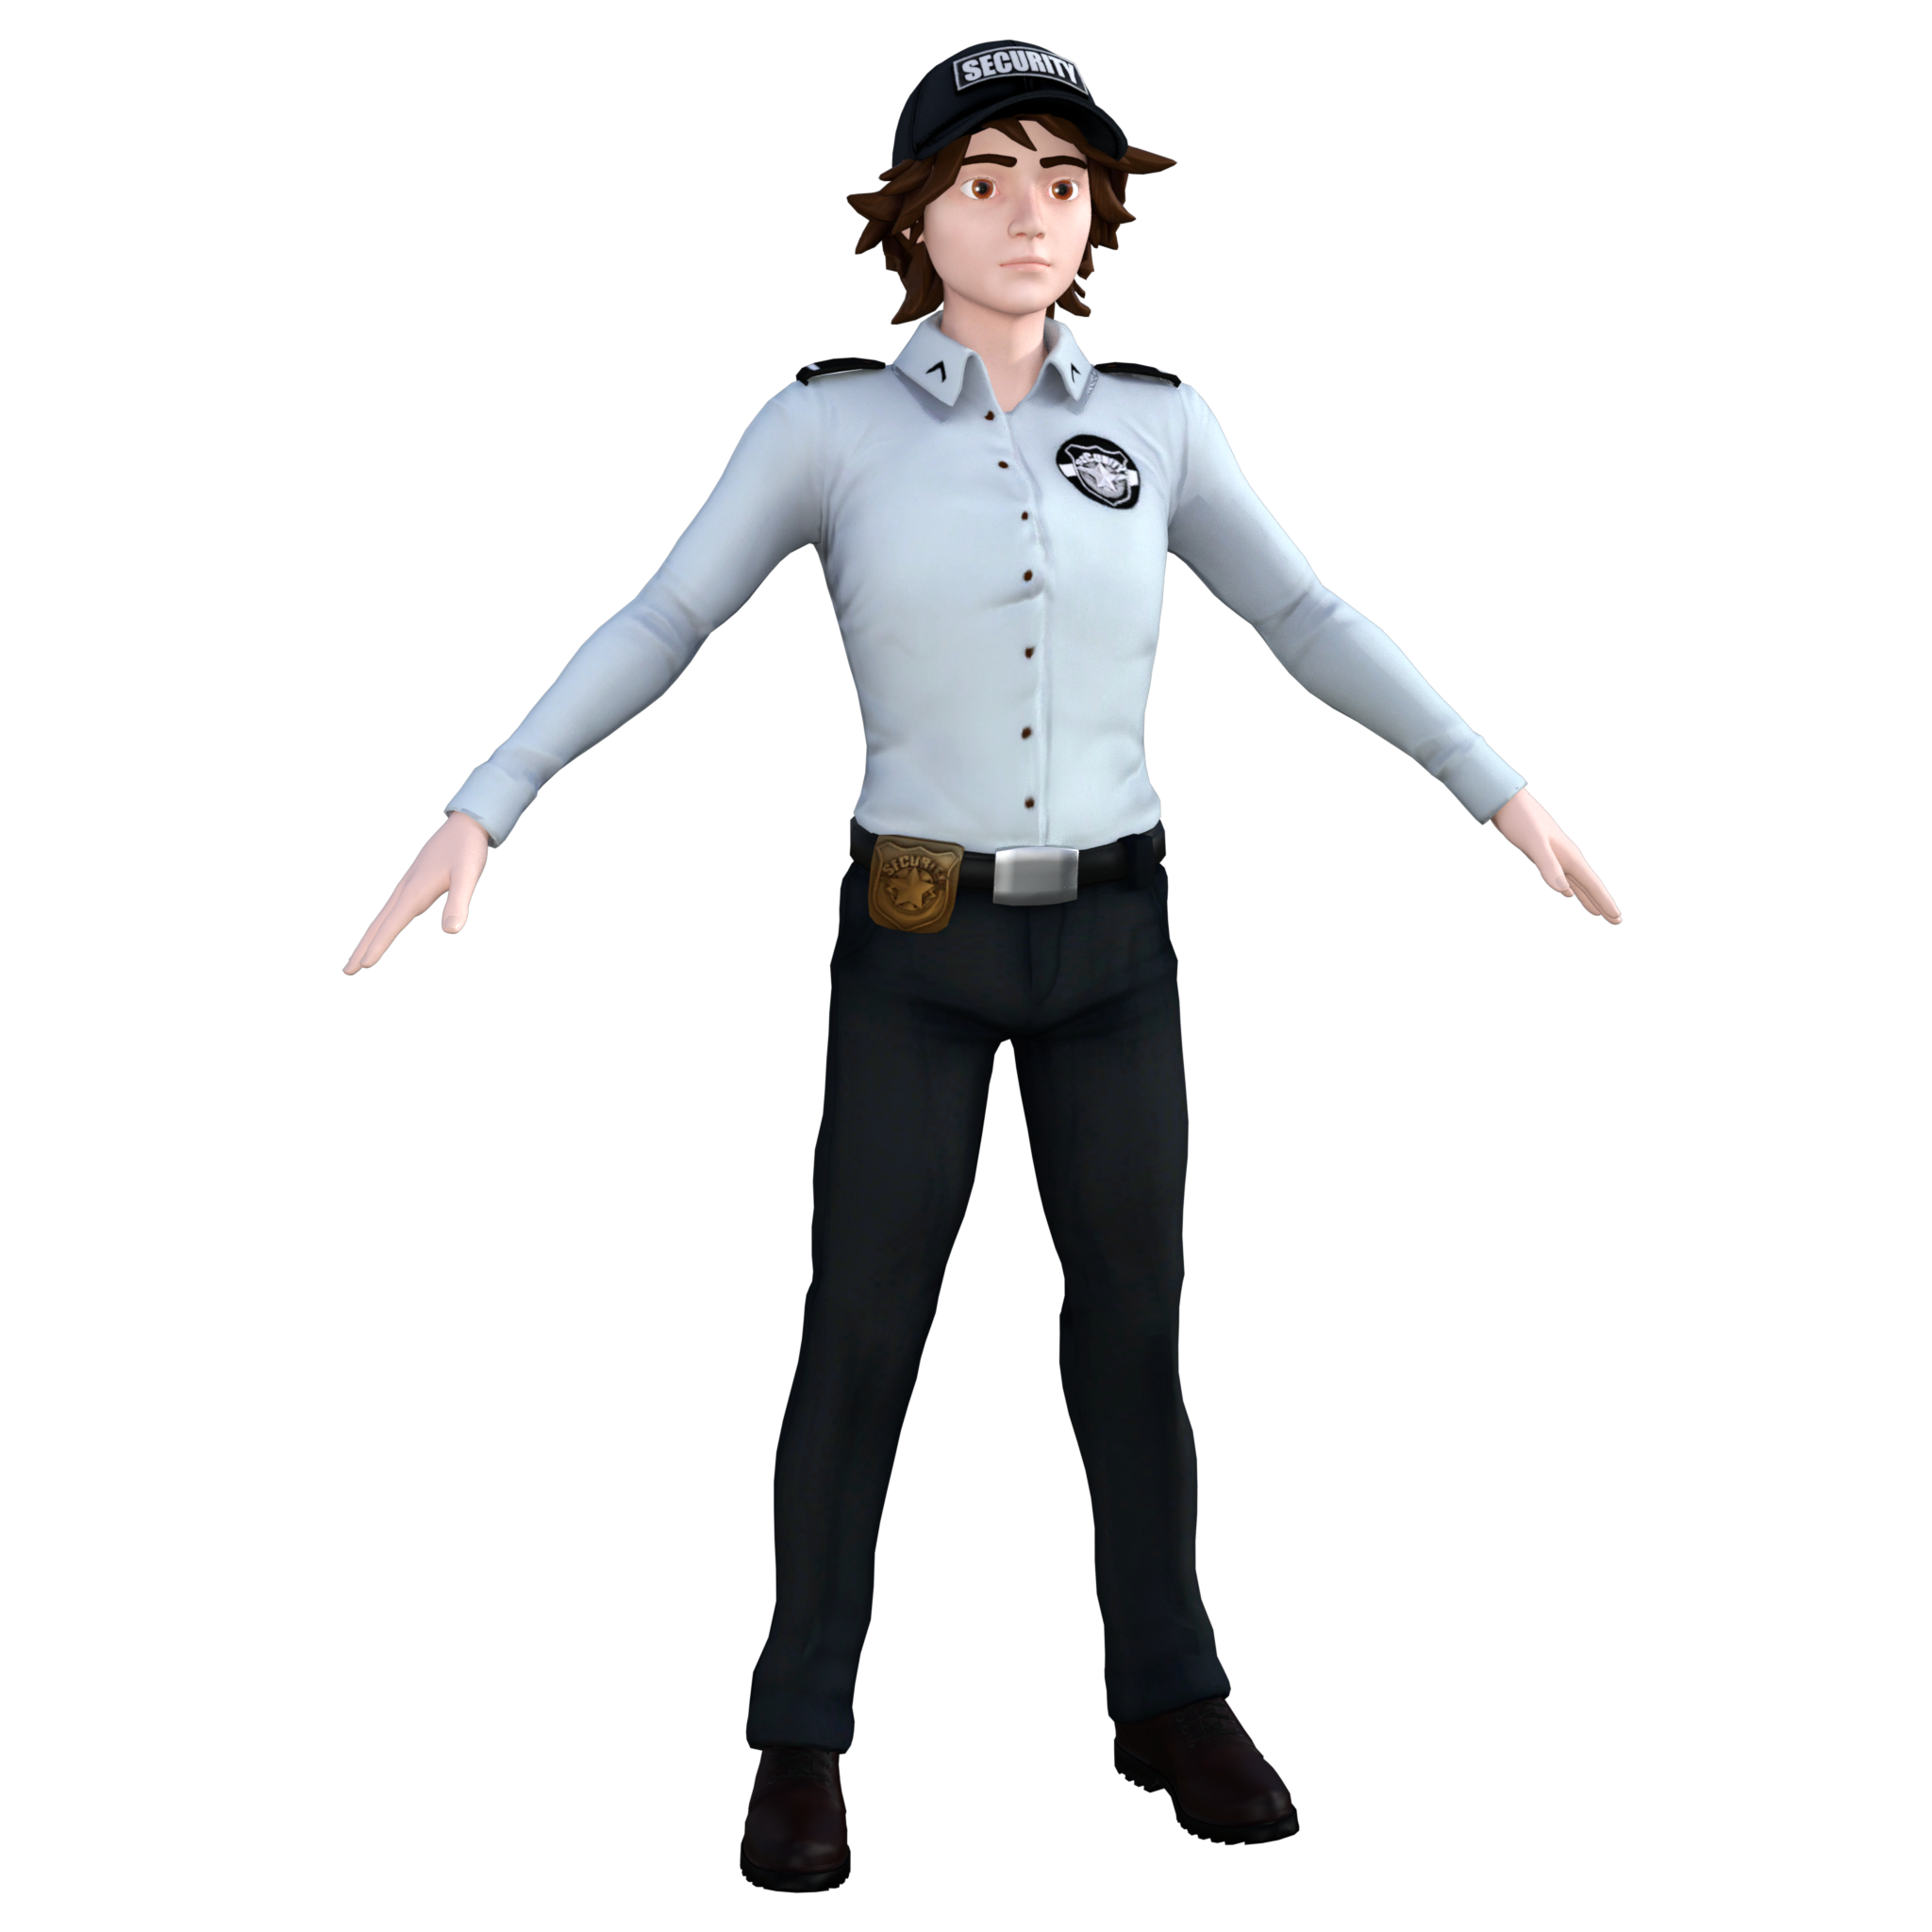 Gregory (SB) Security Guard Adult -RELEASE- by Desperateviewer on DeviantArt